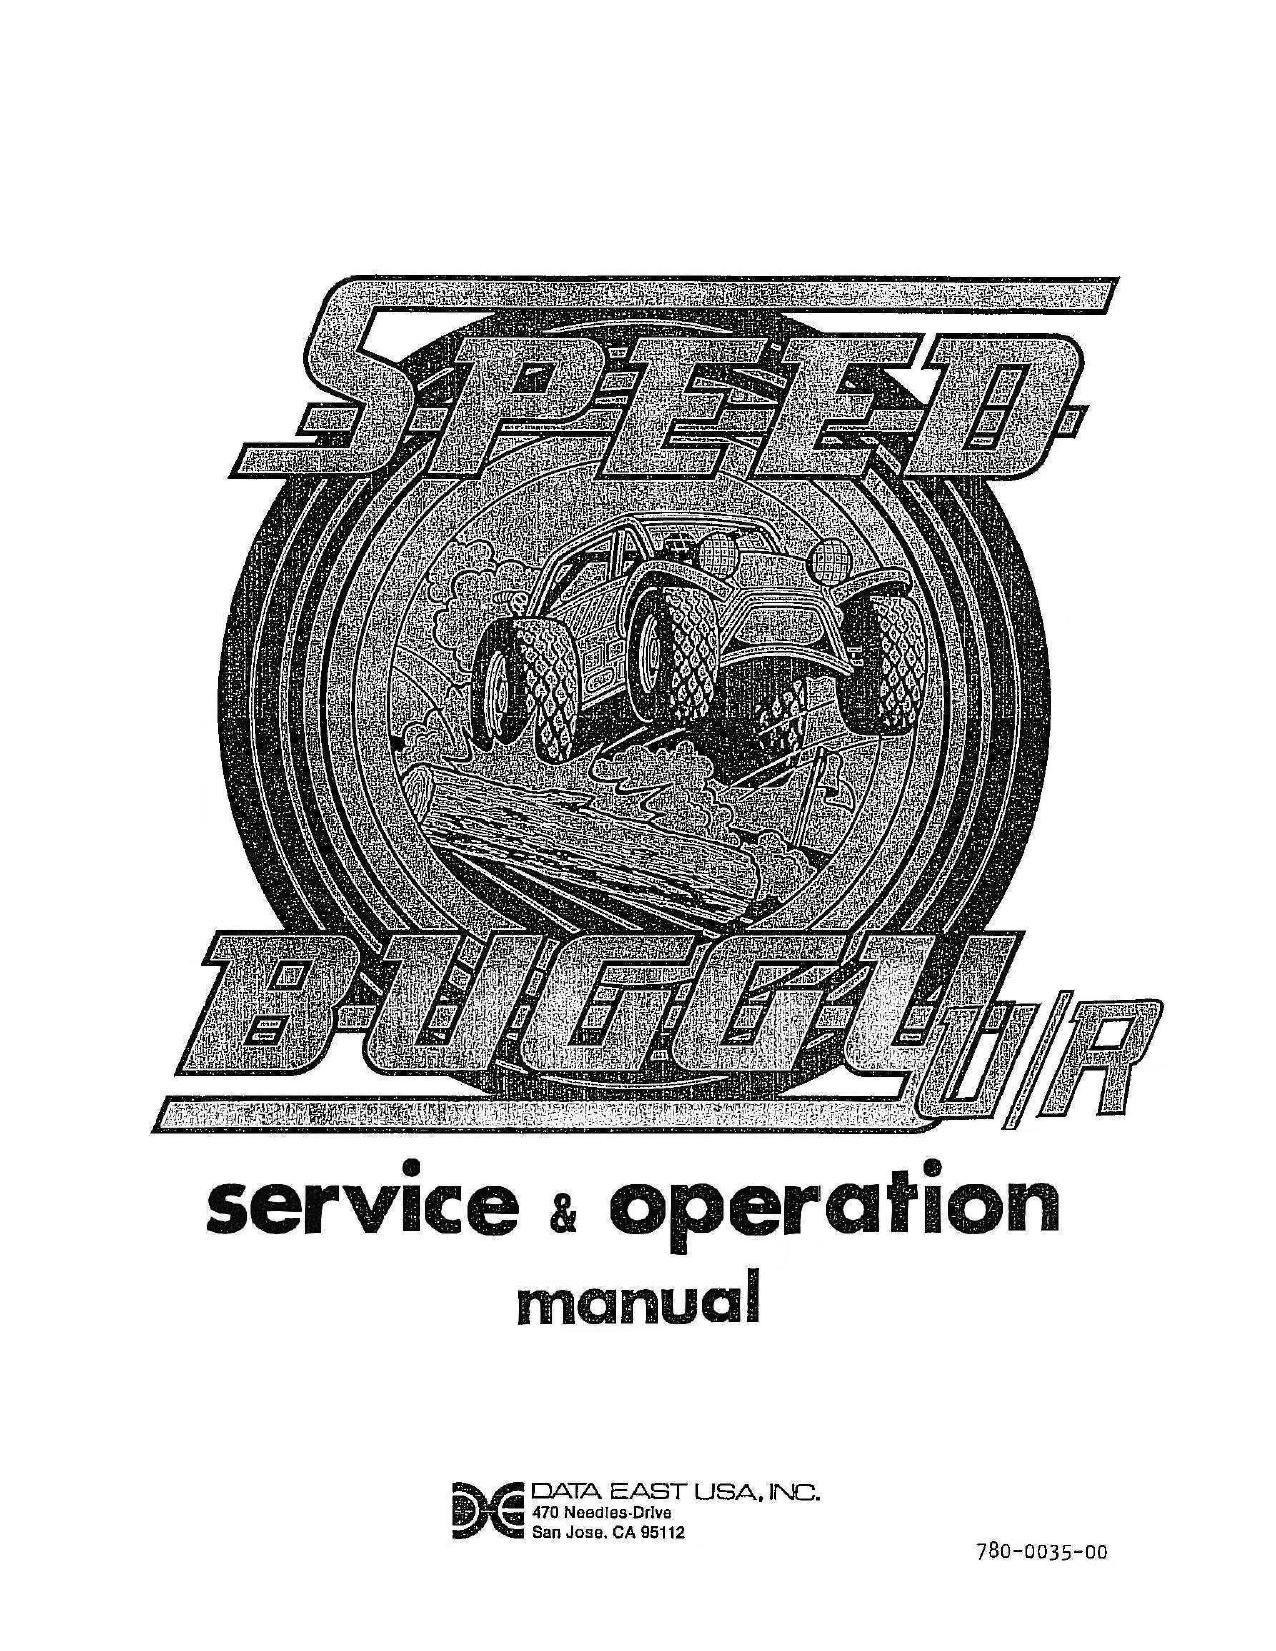 Speed Buggy Service and Operation Manual (780-0035-00)